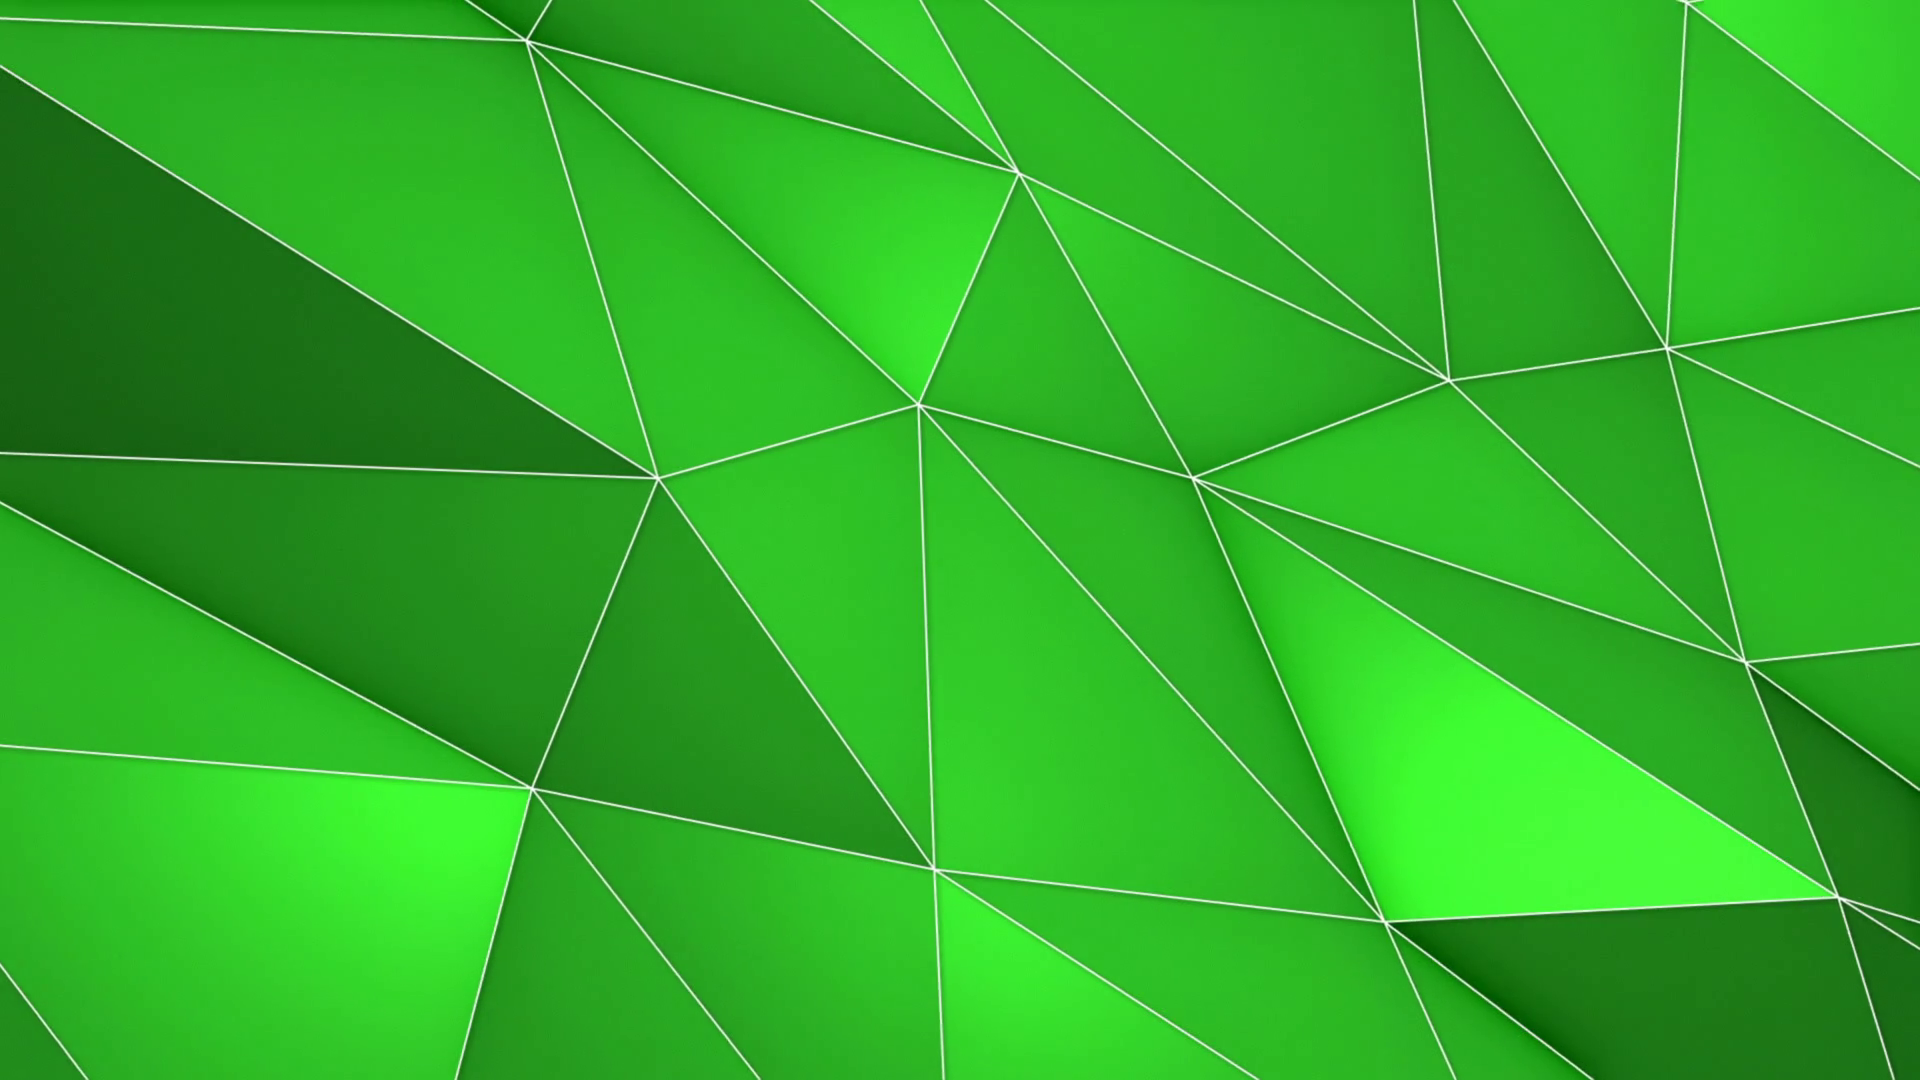 Multicolored Elegant Polygonal Surface | Triangular Polygons with ...